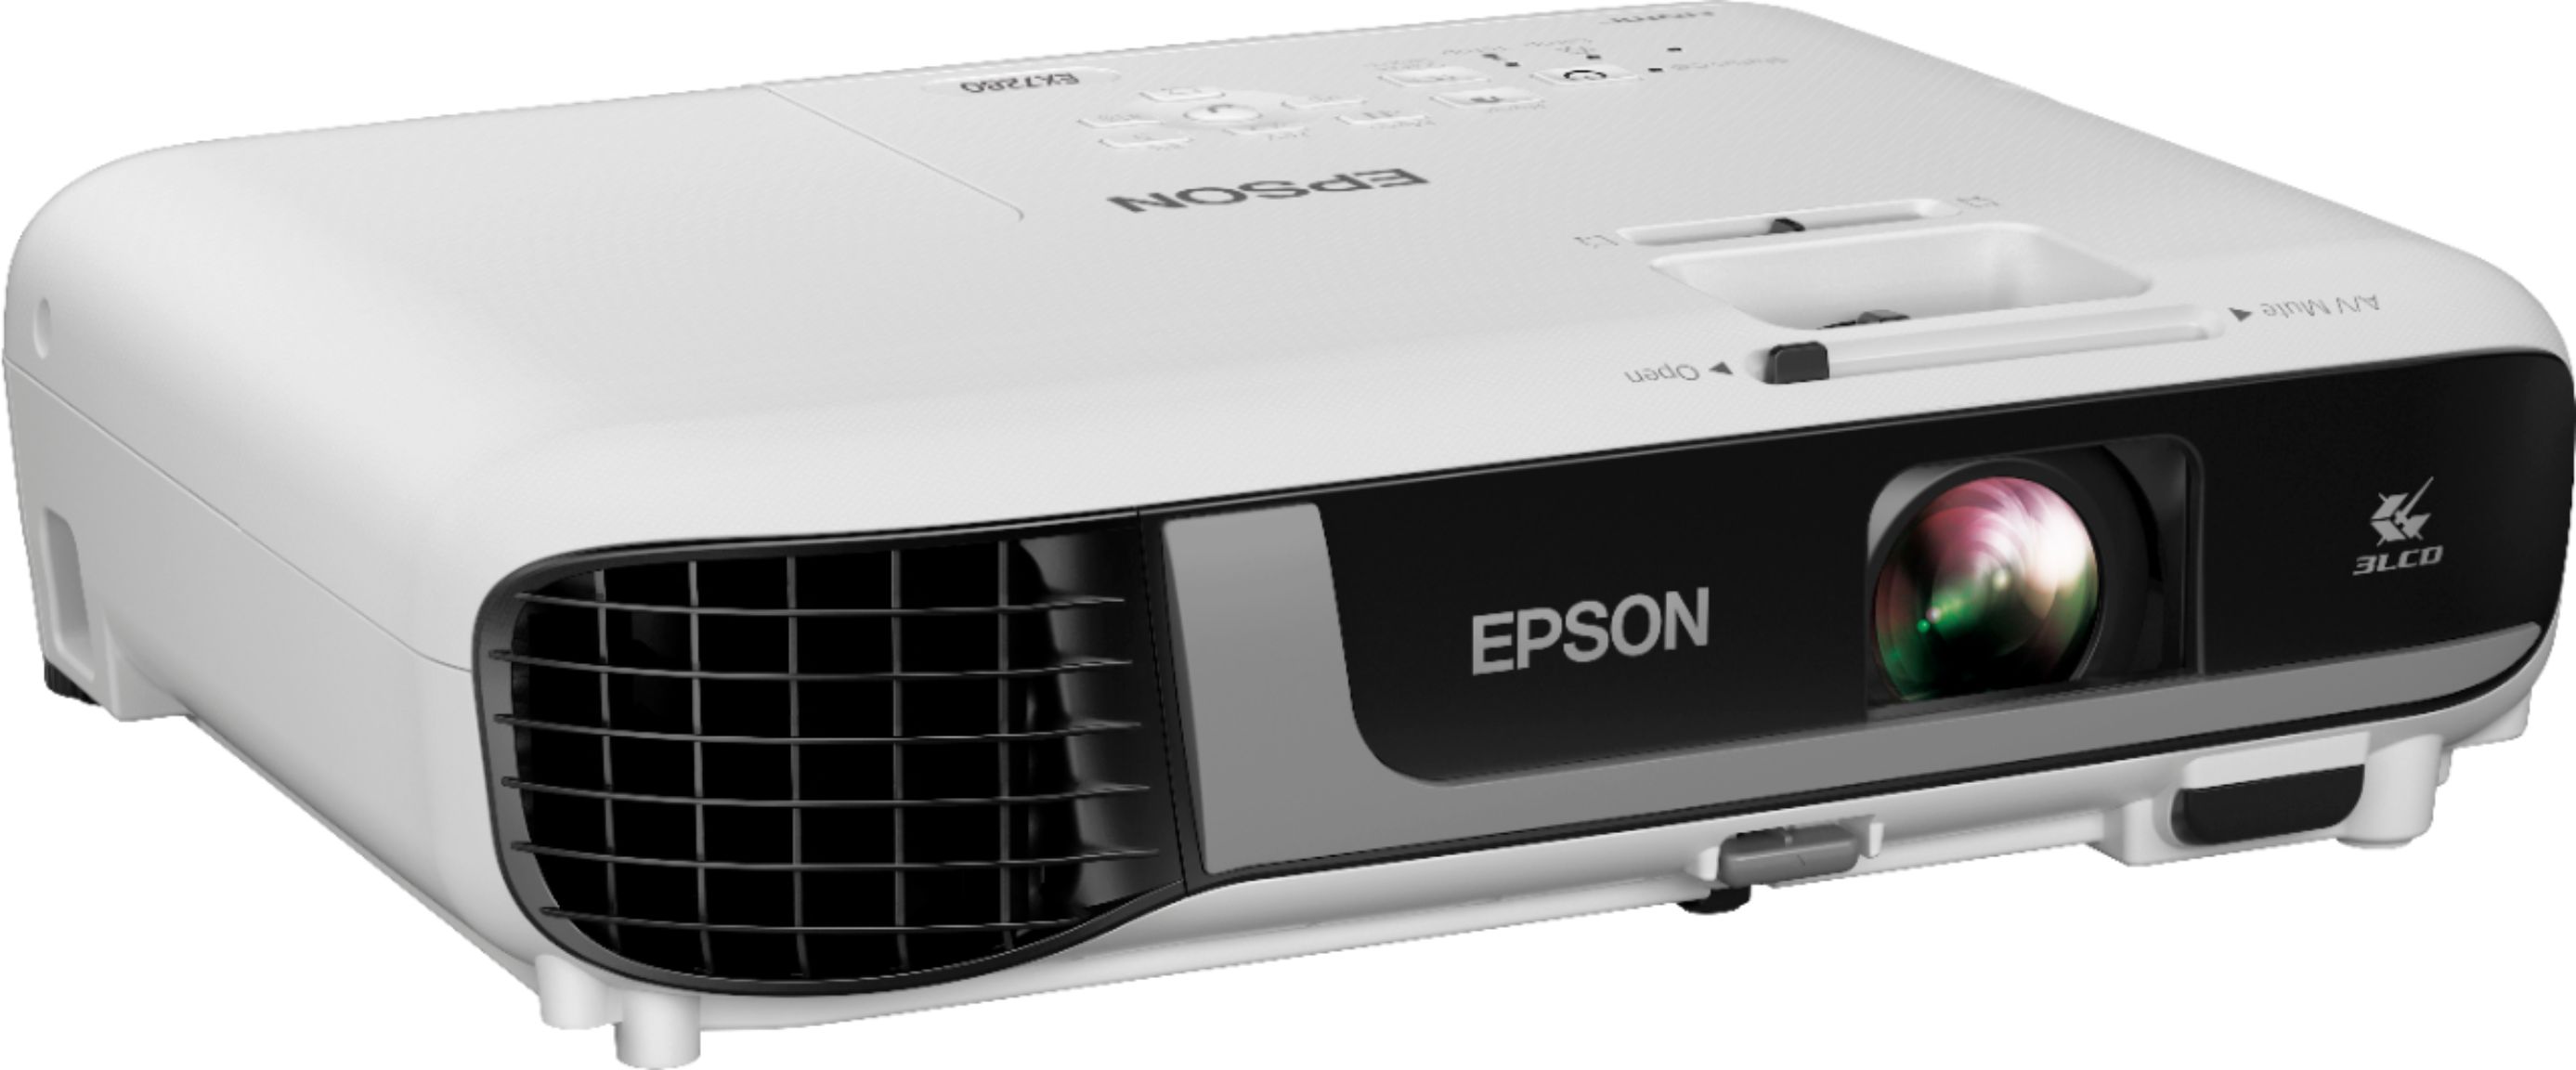 Angle View: Epson - Pro EX7280 3LCD WXGA Projector with Built-in Speaker - White